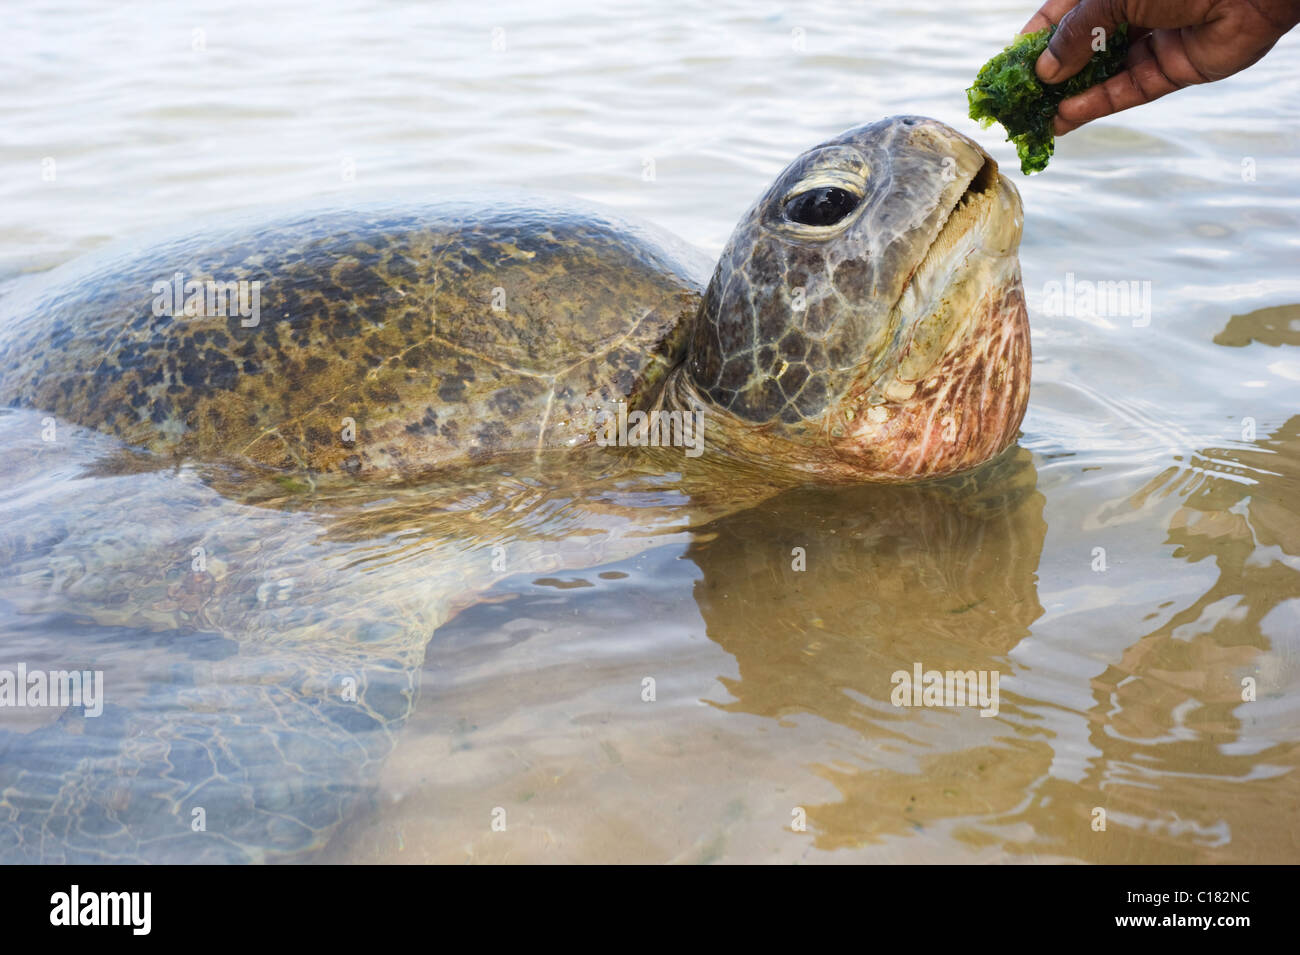 Turtle eating in the ocean Stock Photo